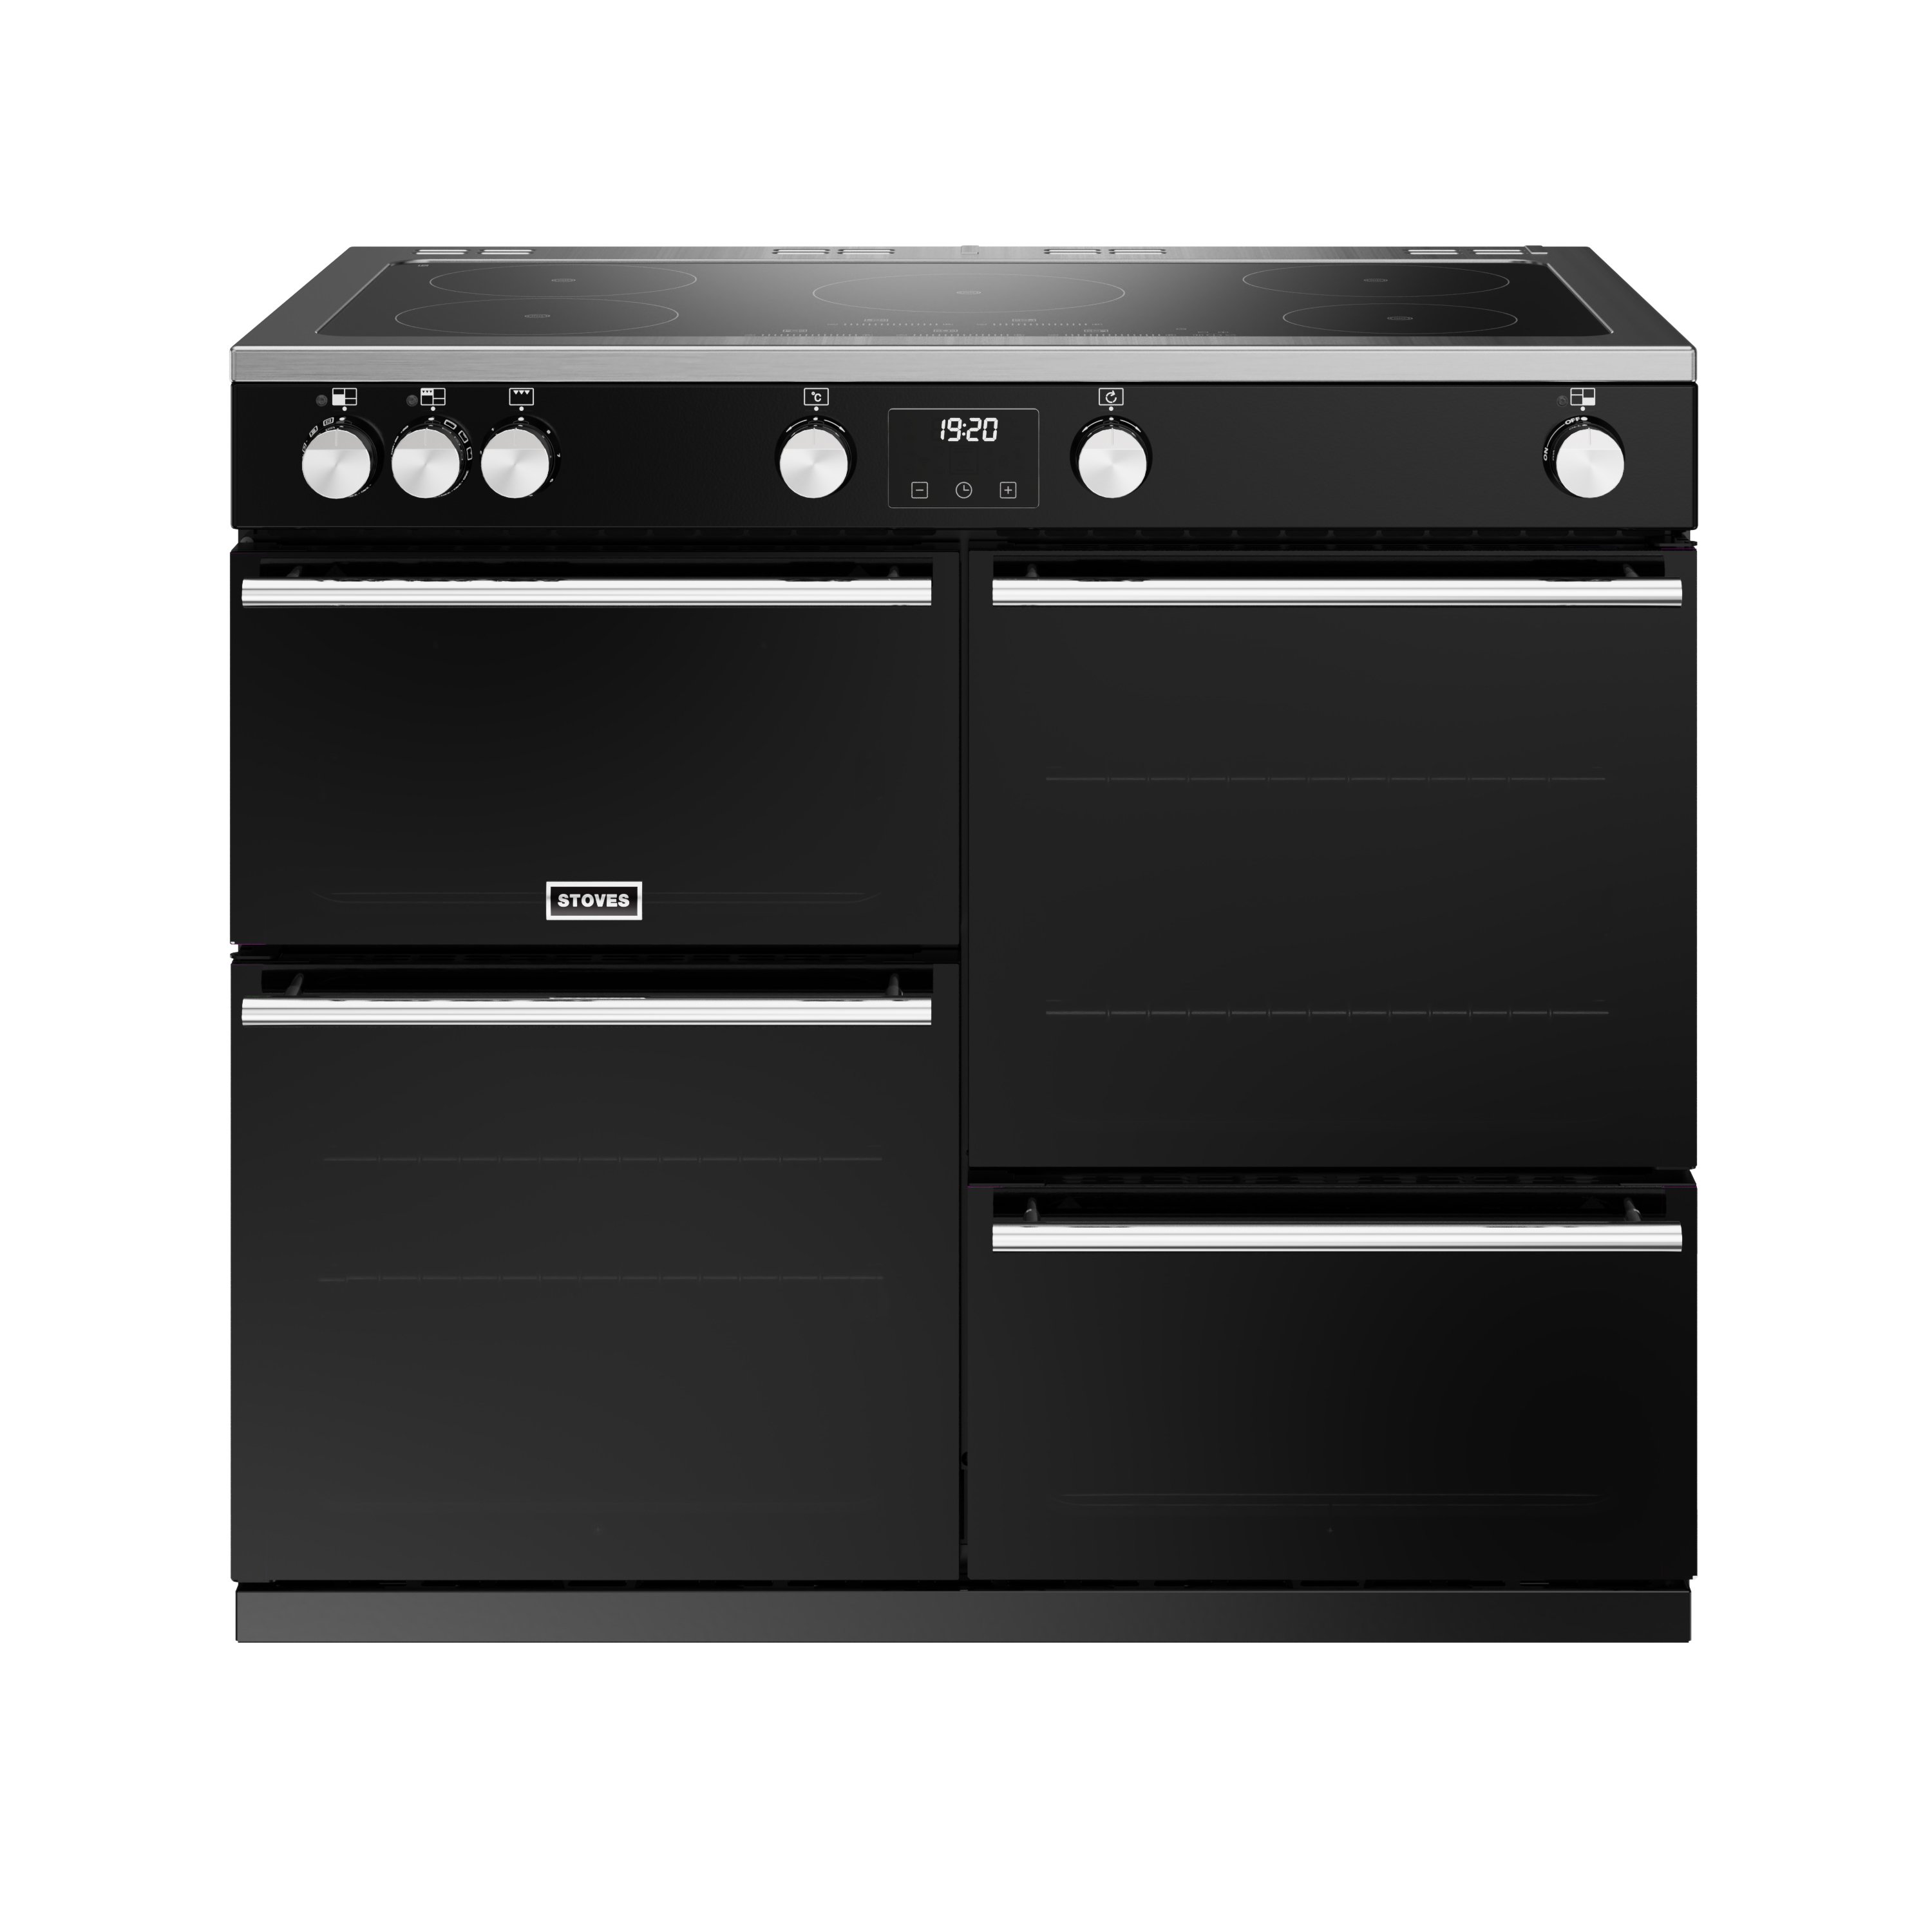 100cm electric induction range cooker with a 5 zone touch control hob, conventional oven & grill, multifunction main oven with TrueTemp digital thermostat, fanned second oven and dedicated slow cook oven